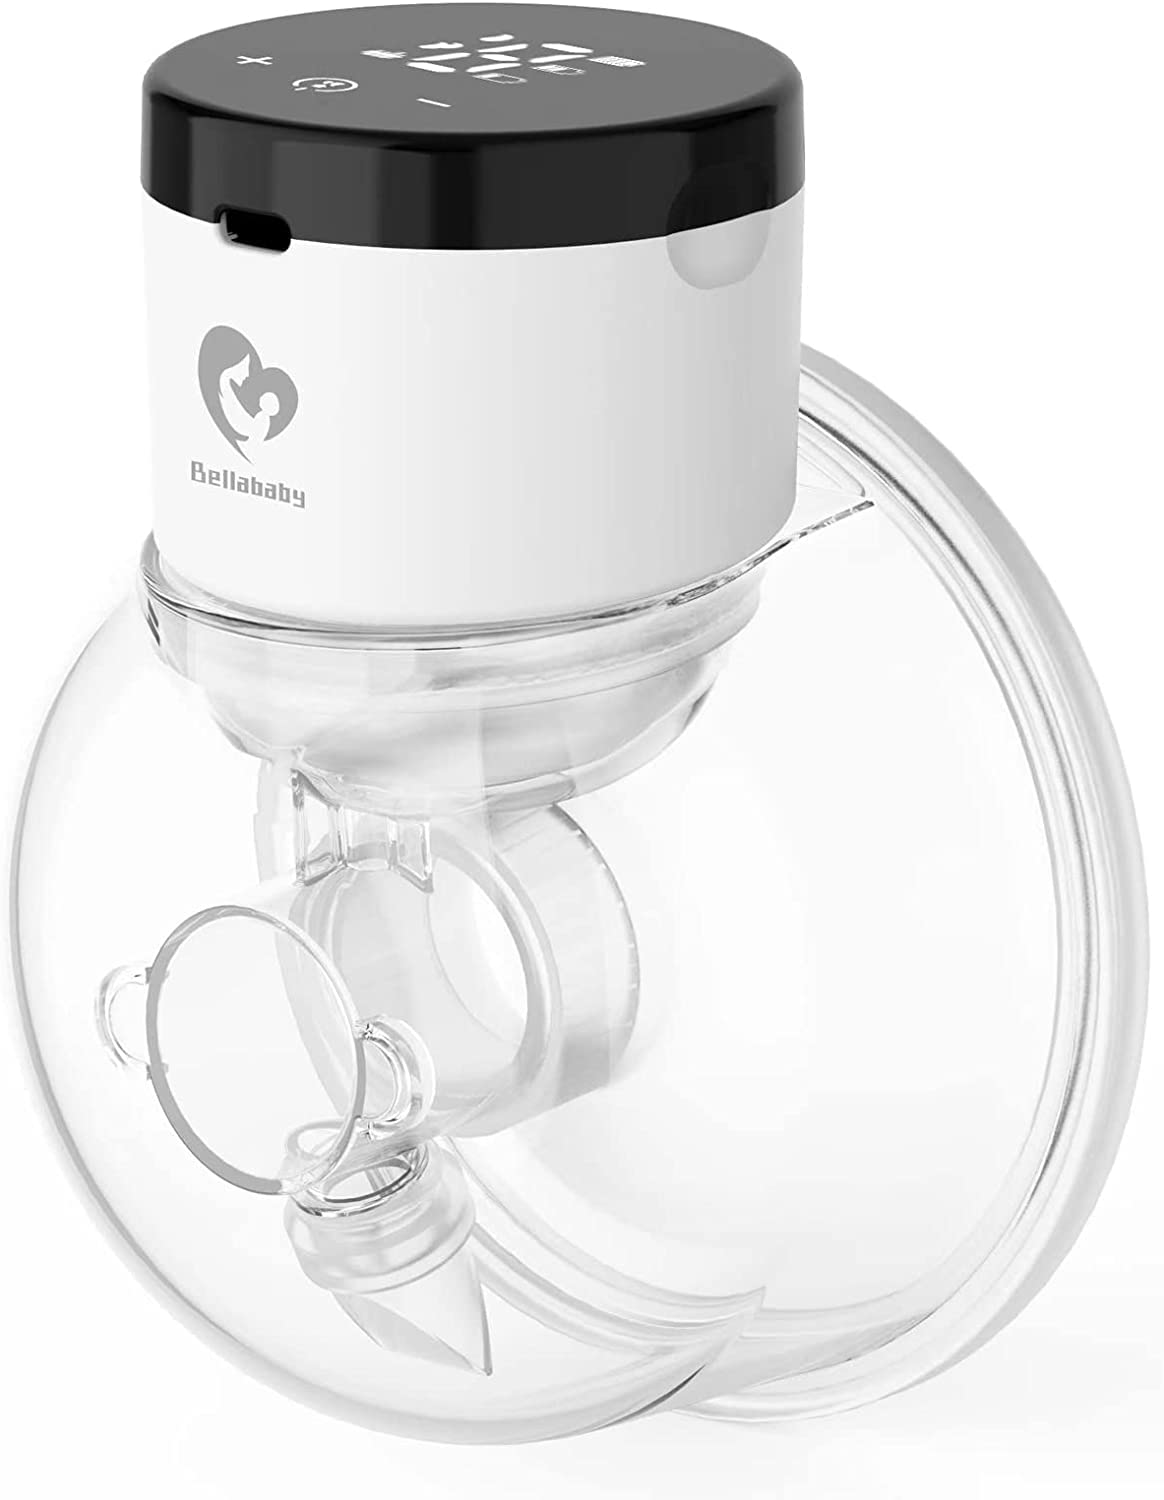 Bellababy Electric Portable Breast Pump Double Hands-Free with Touchscreen LCD Display, Rechargeable Hands-Free 4 Modes and 9 Levels, White